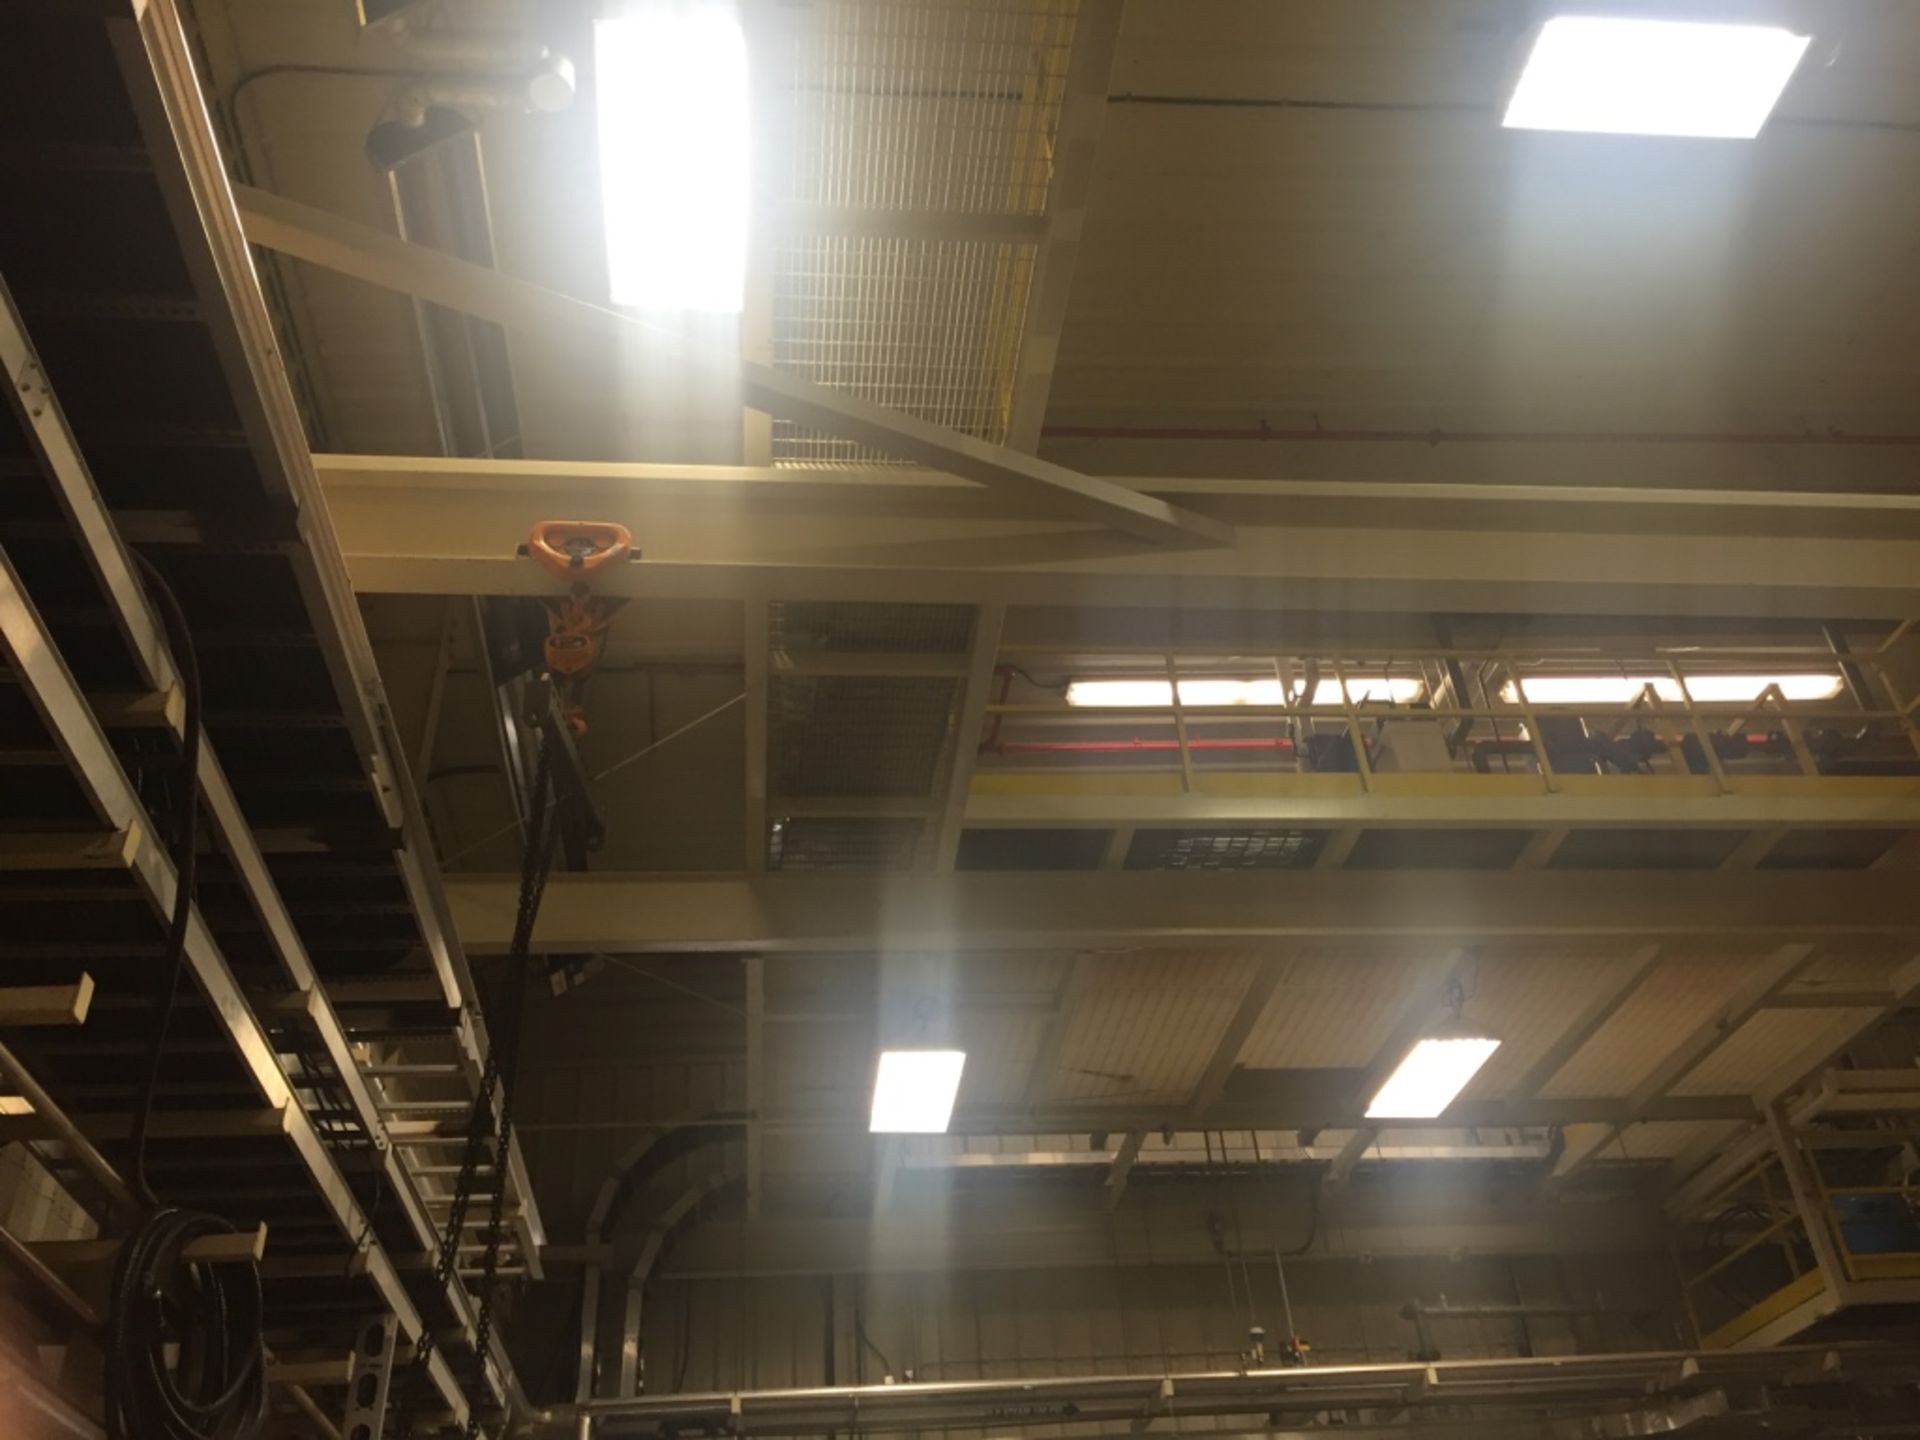 1 Ton Chain Hoist on Trolley with Cross Beam ( No Support Beams) - Image 2 of 2